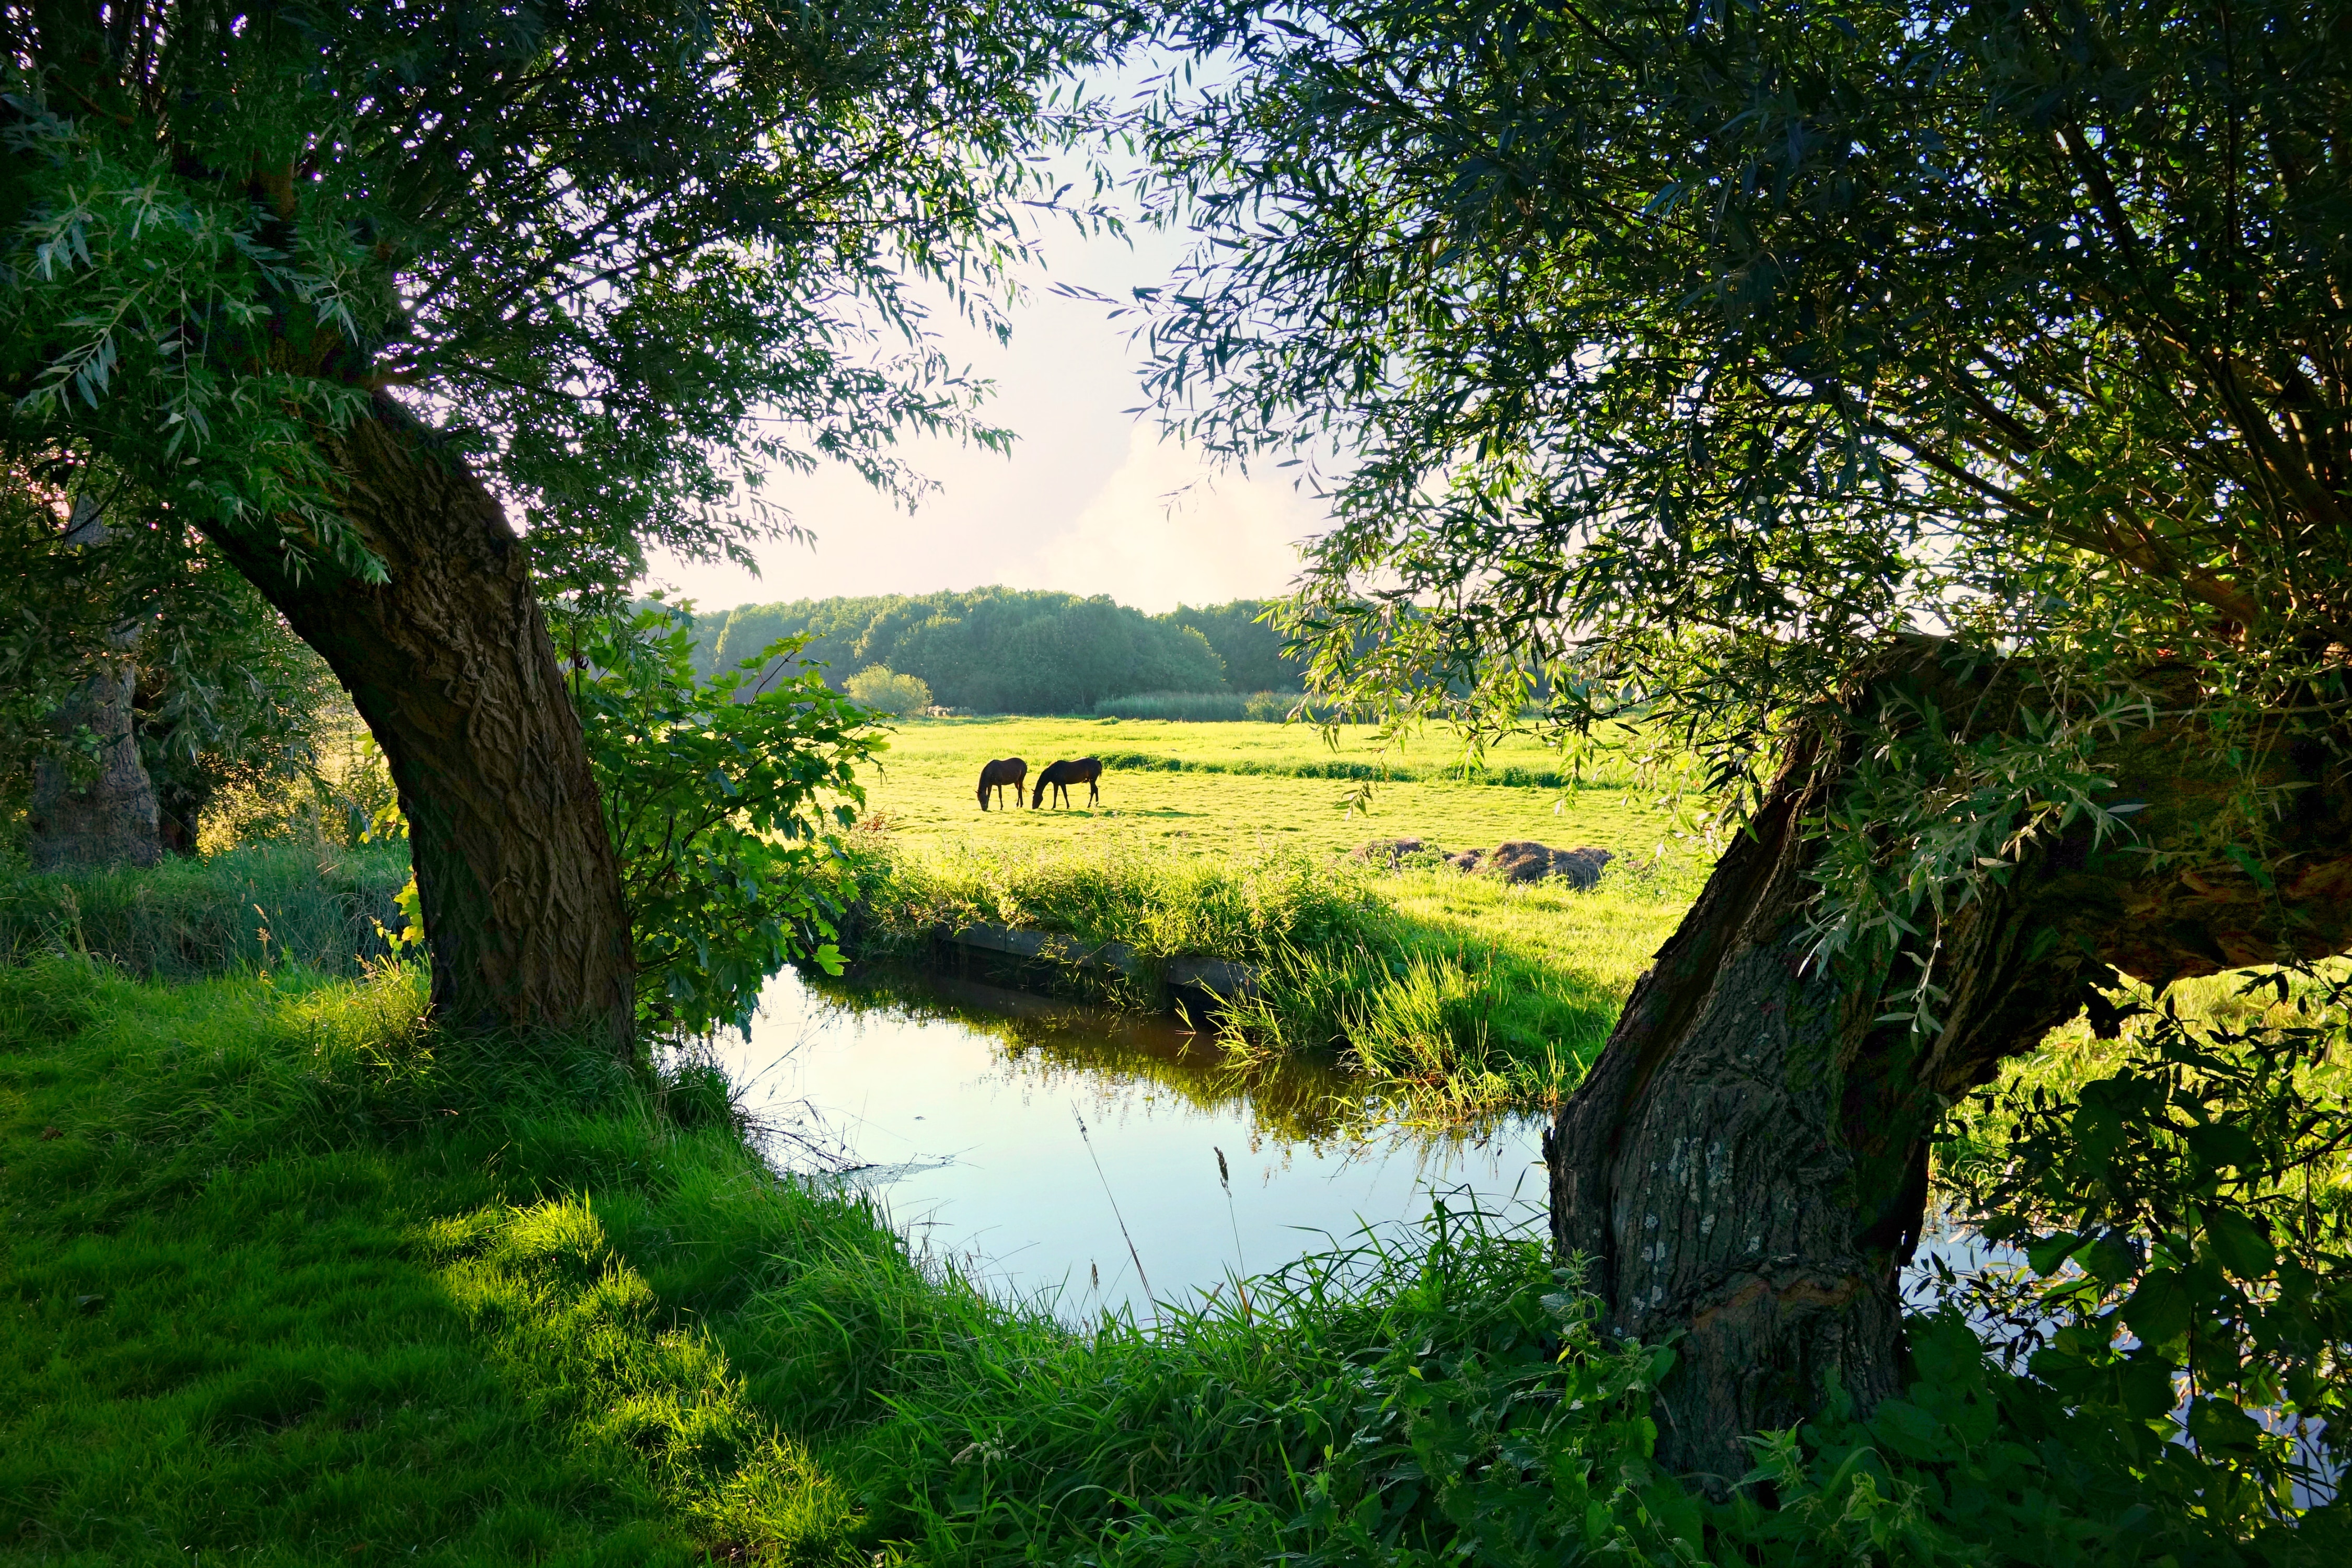 green trees beside body of water and animals during day time